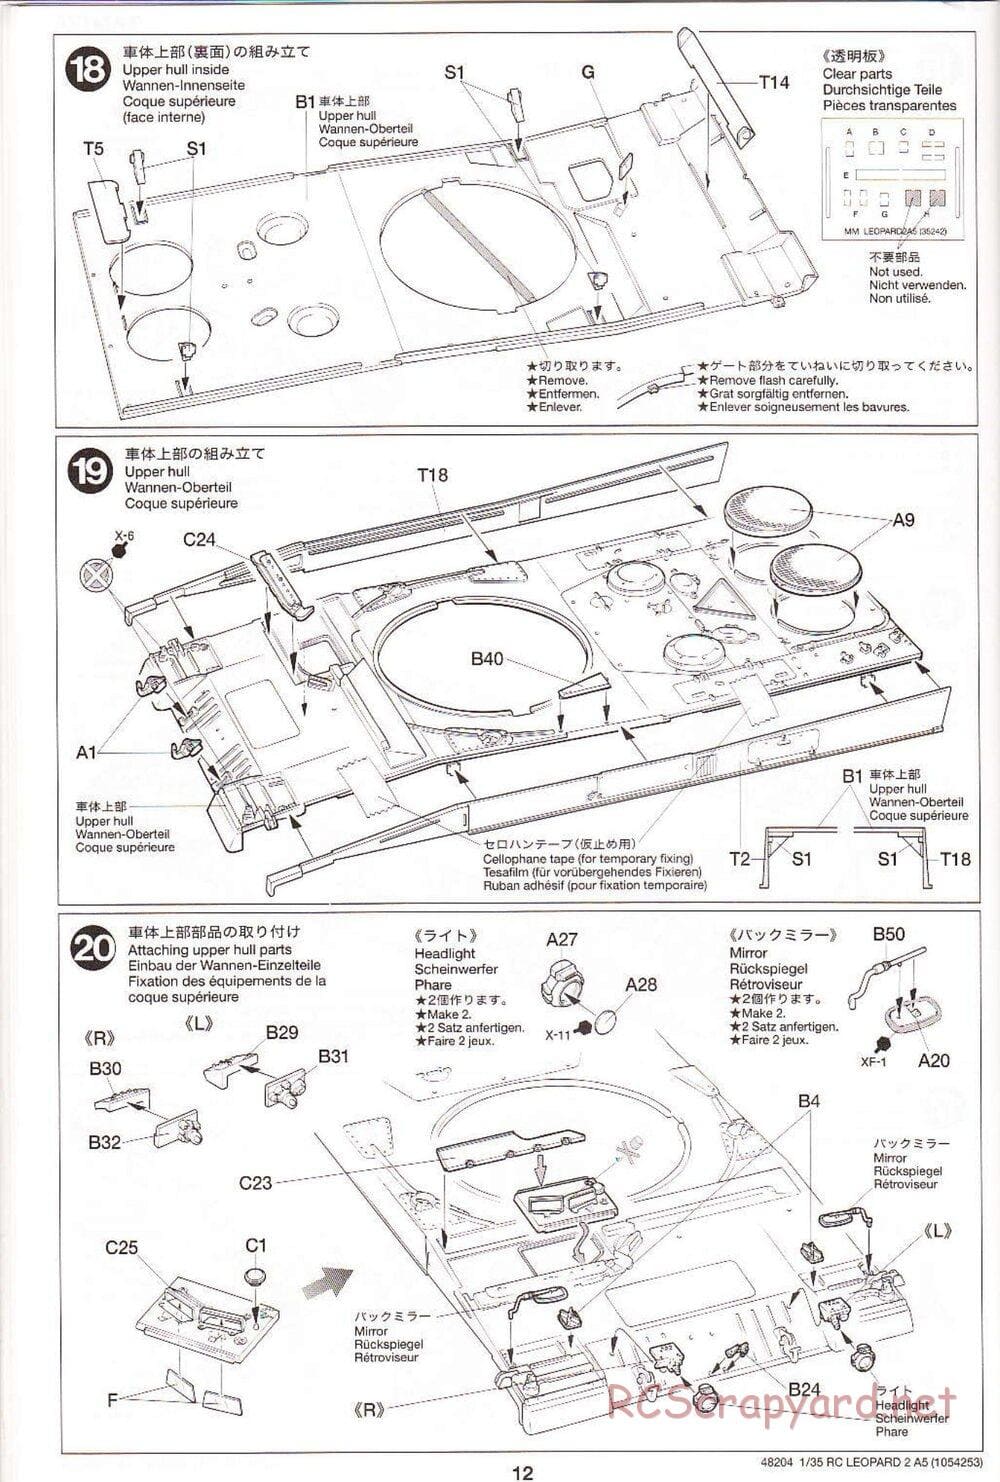 Tamiya - Leopard 2 A5 Main Battle Tank - 1/35 Scale Chassis - Manual - Page 12